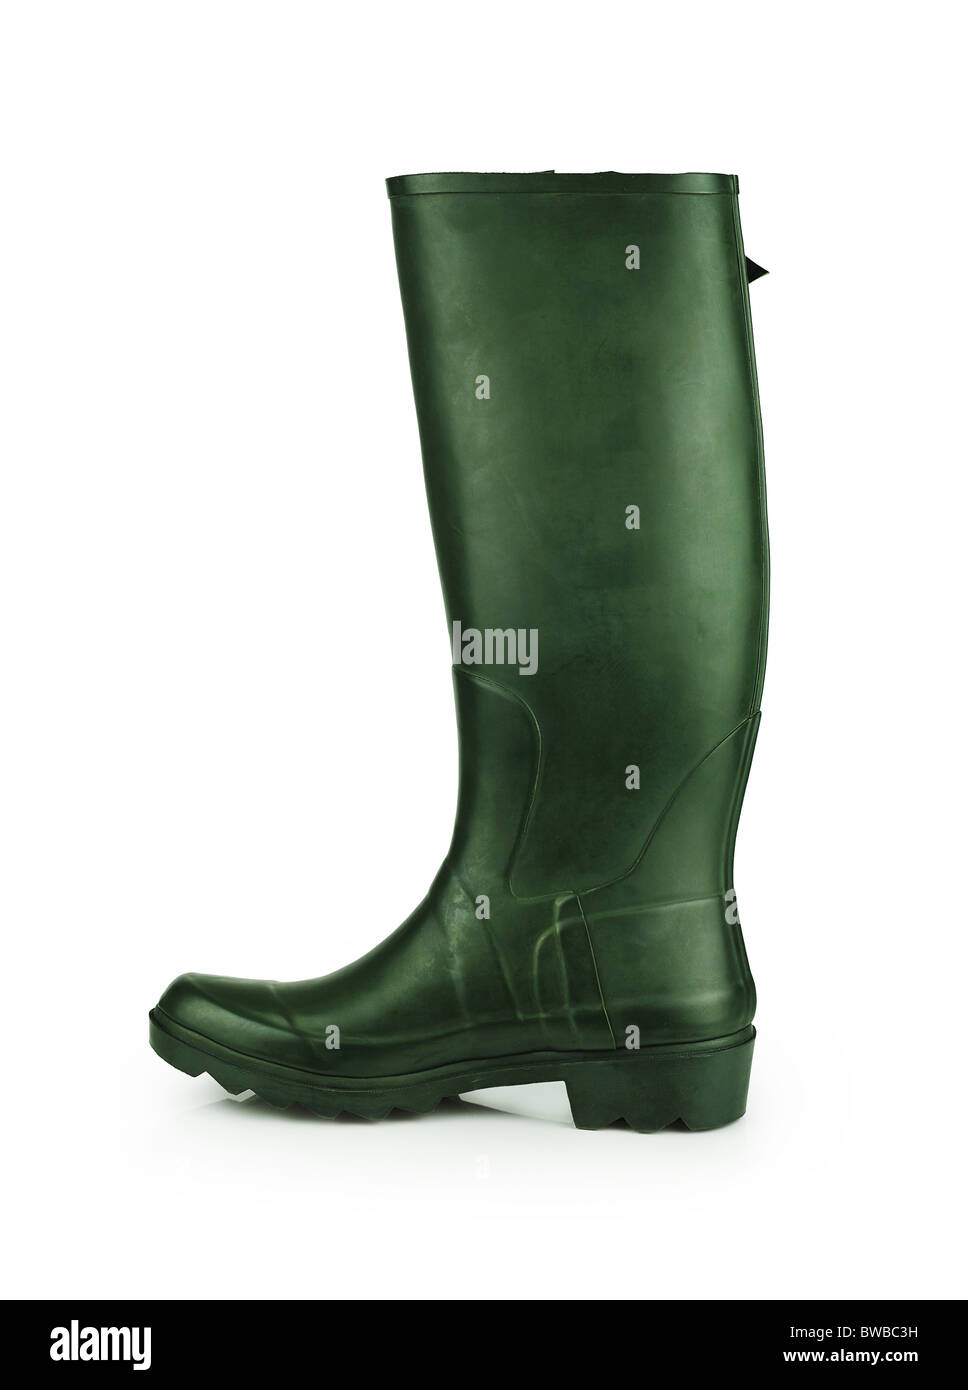 Green rubber boot Stock Photo